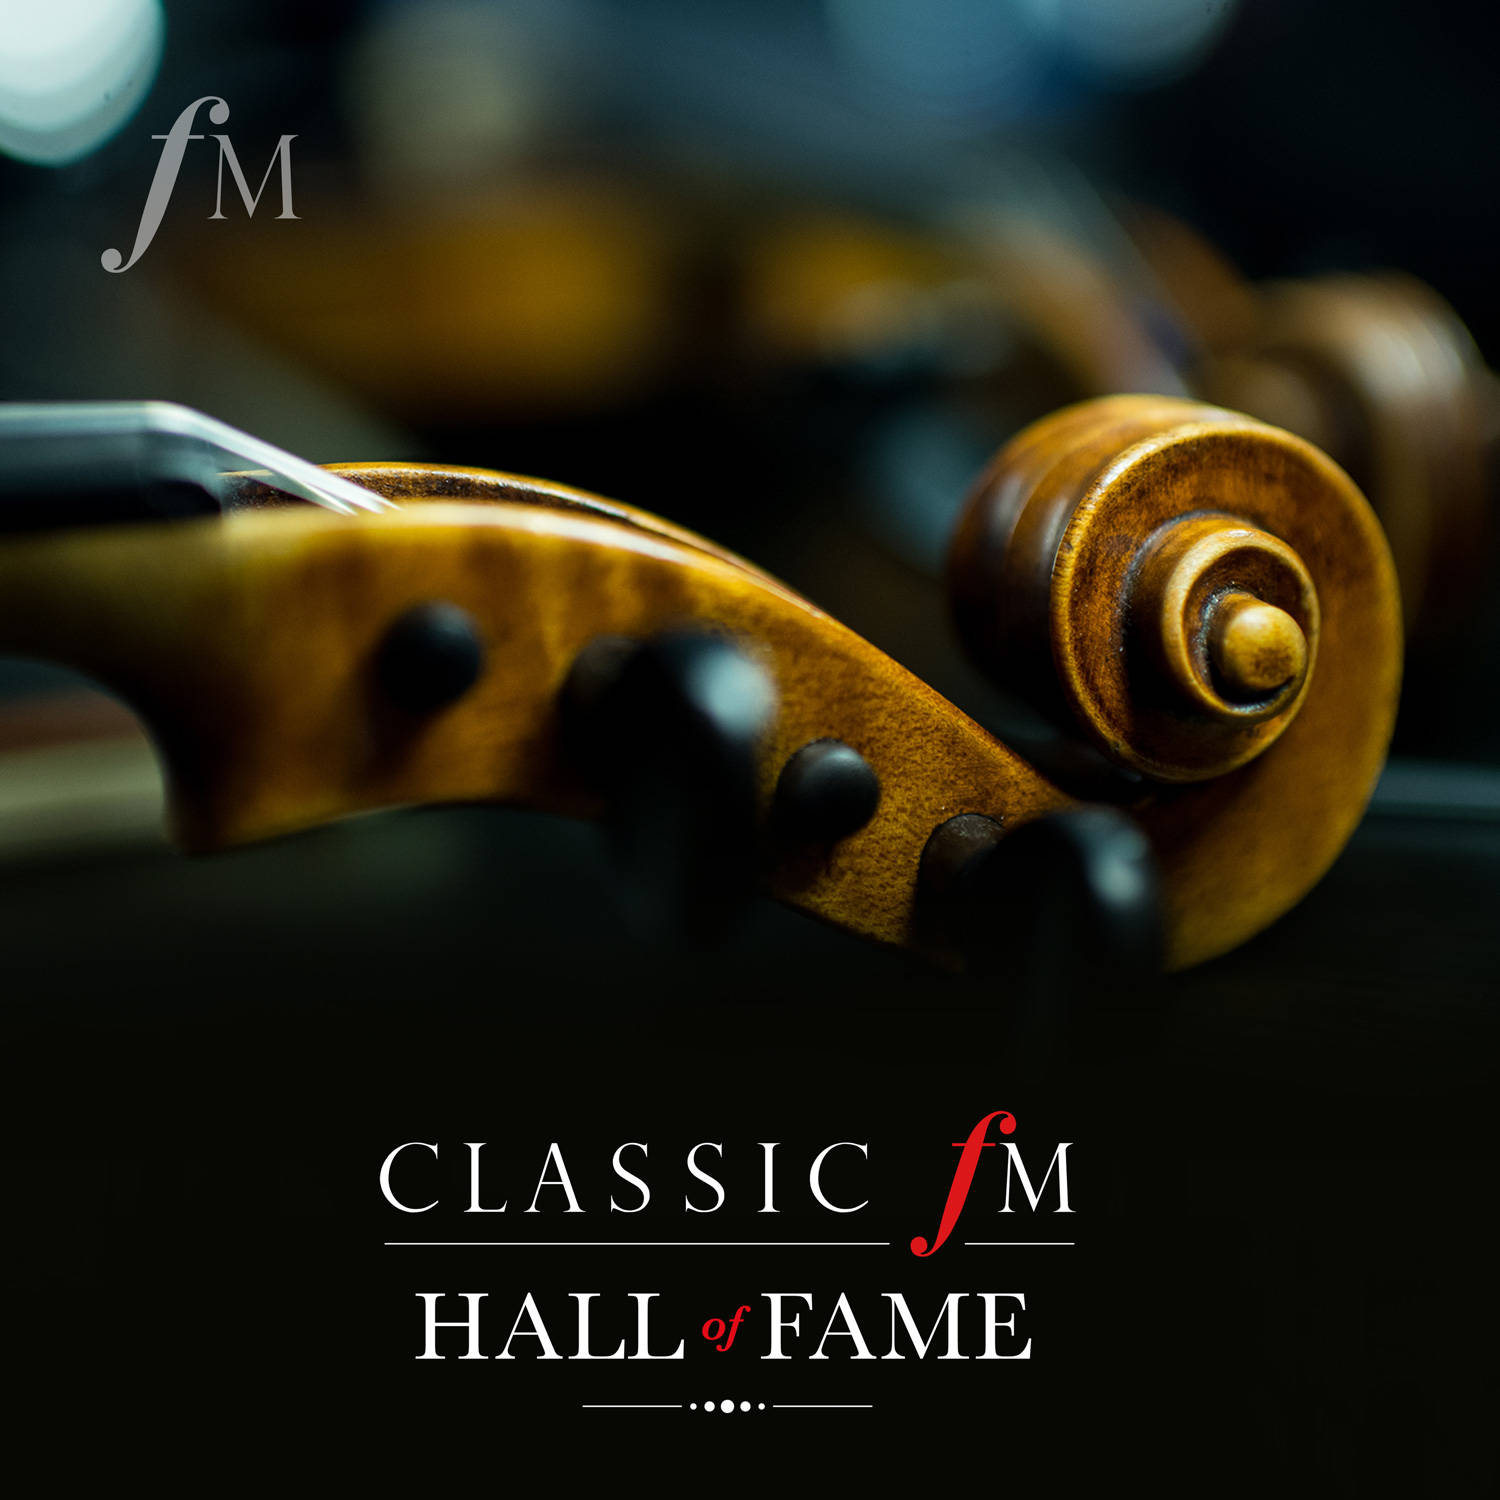 Classic FM Hall of Fame 2021 image